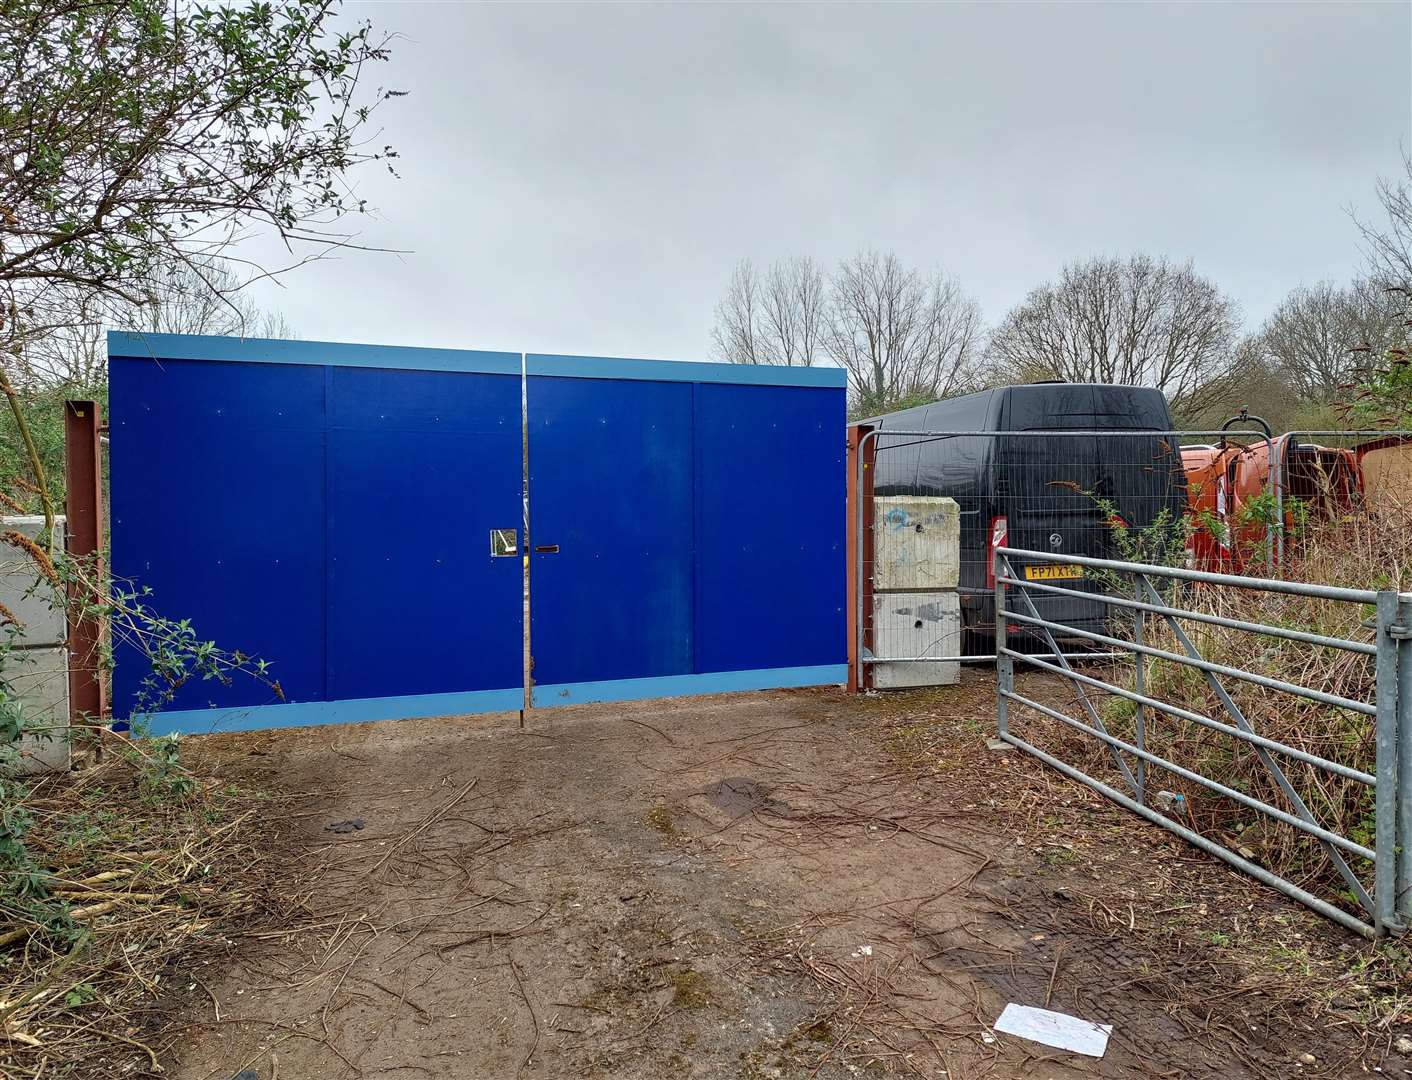 A new blue hoarding has appeared at the Aldi site